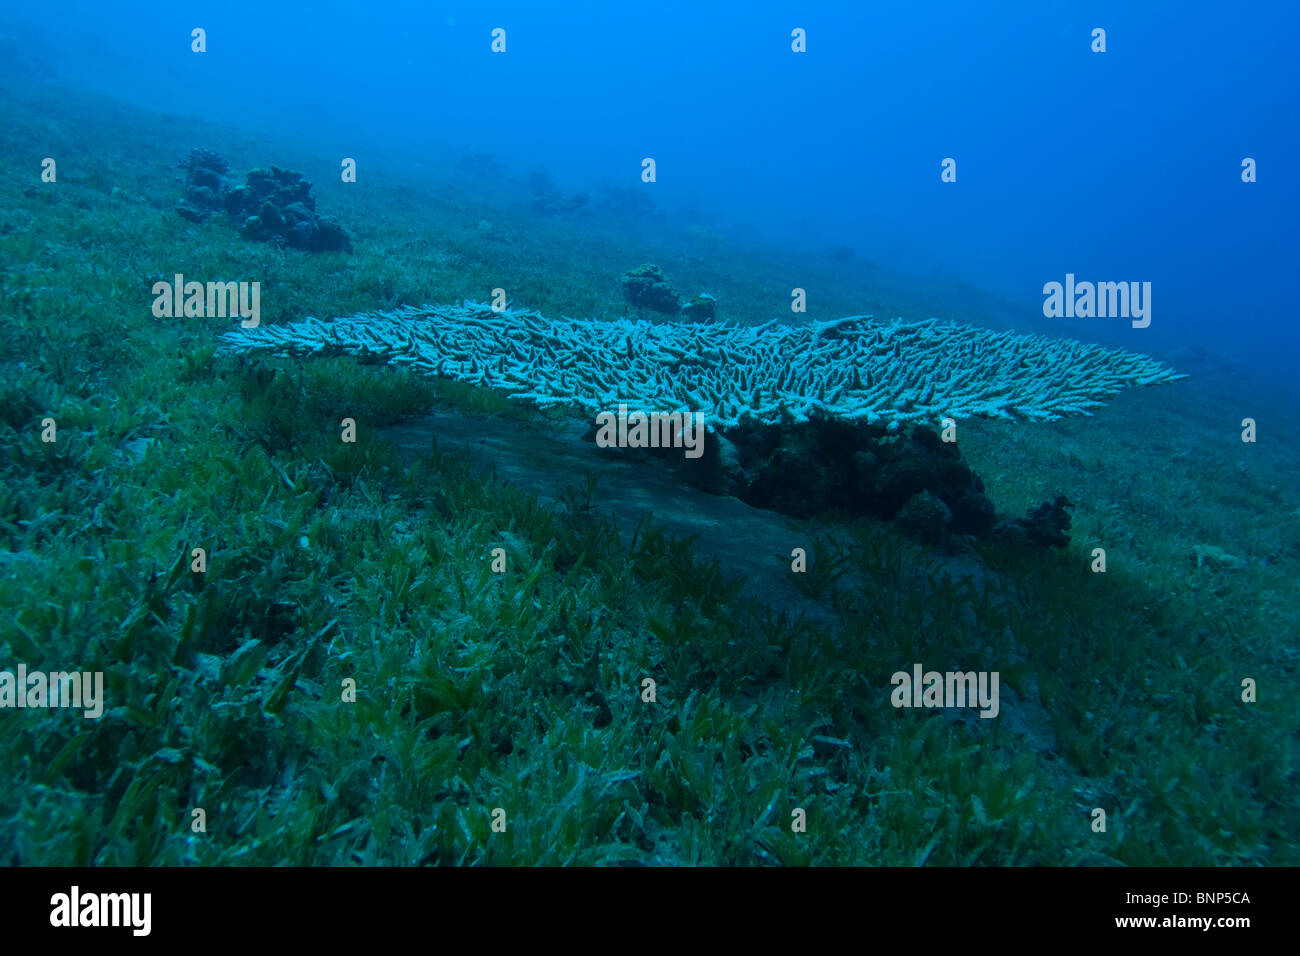 Table corals at 30m depth (Acropora parapharaonis) Stock Photo